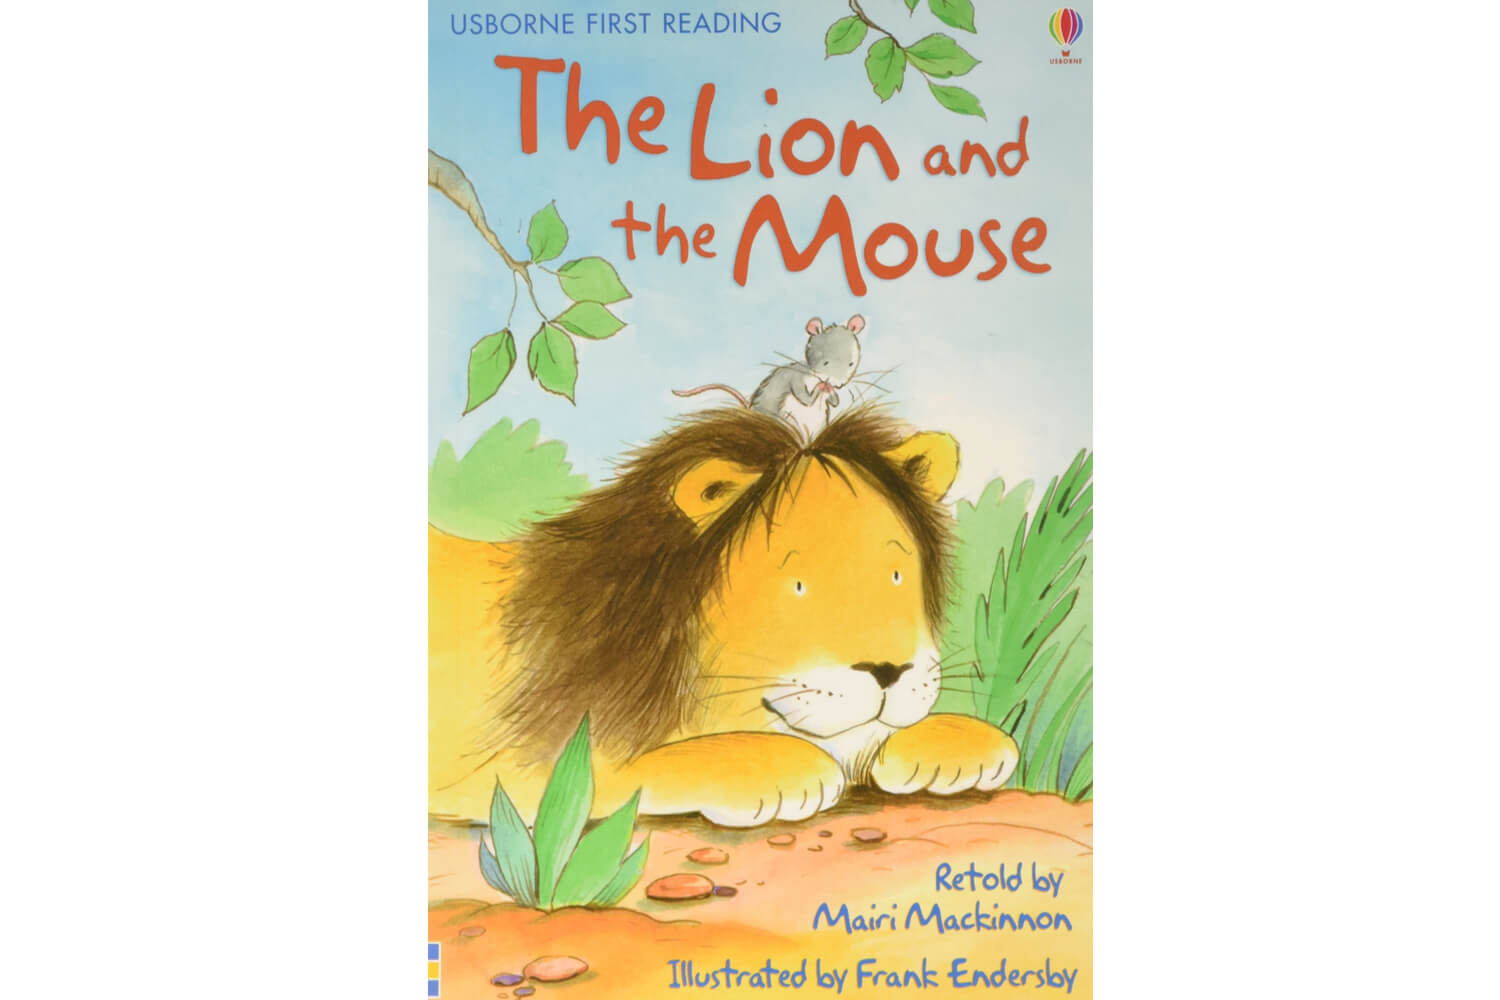 The Lion and The Mouse- short animal stories for kids